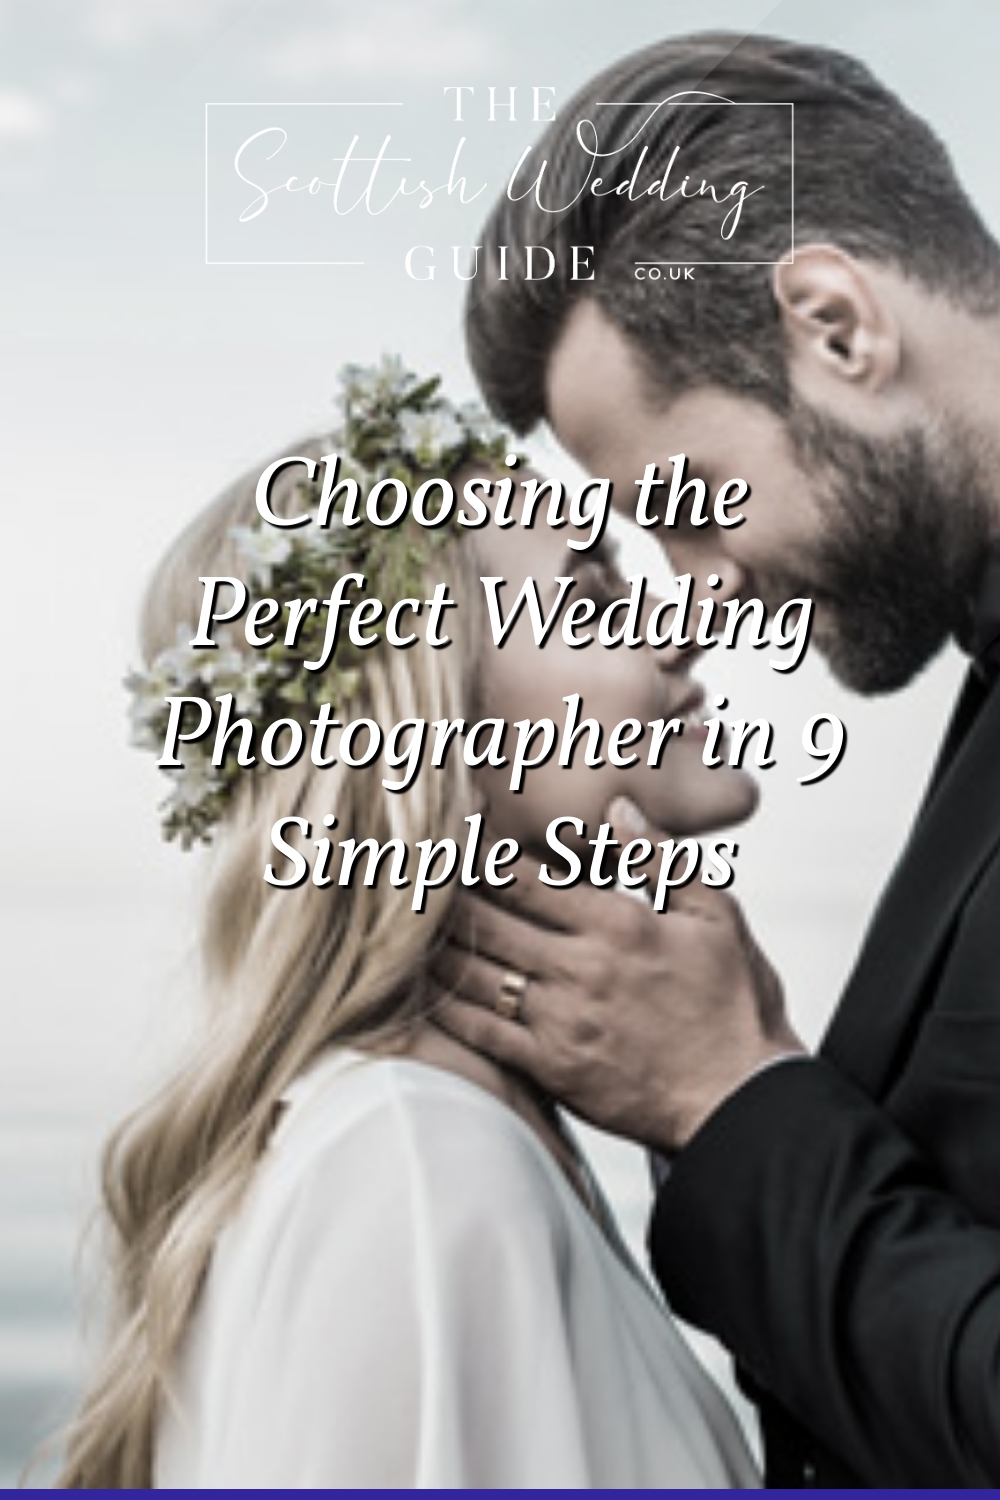 Choosing the Perfect Wedding Photographer in 9 Simple Steps